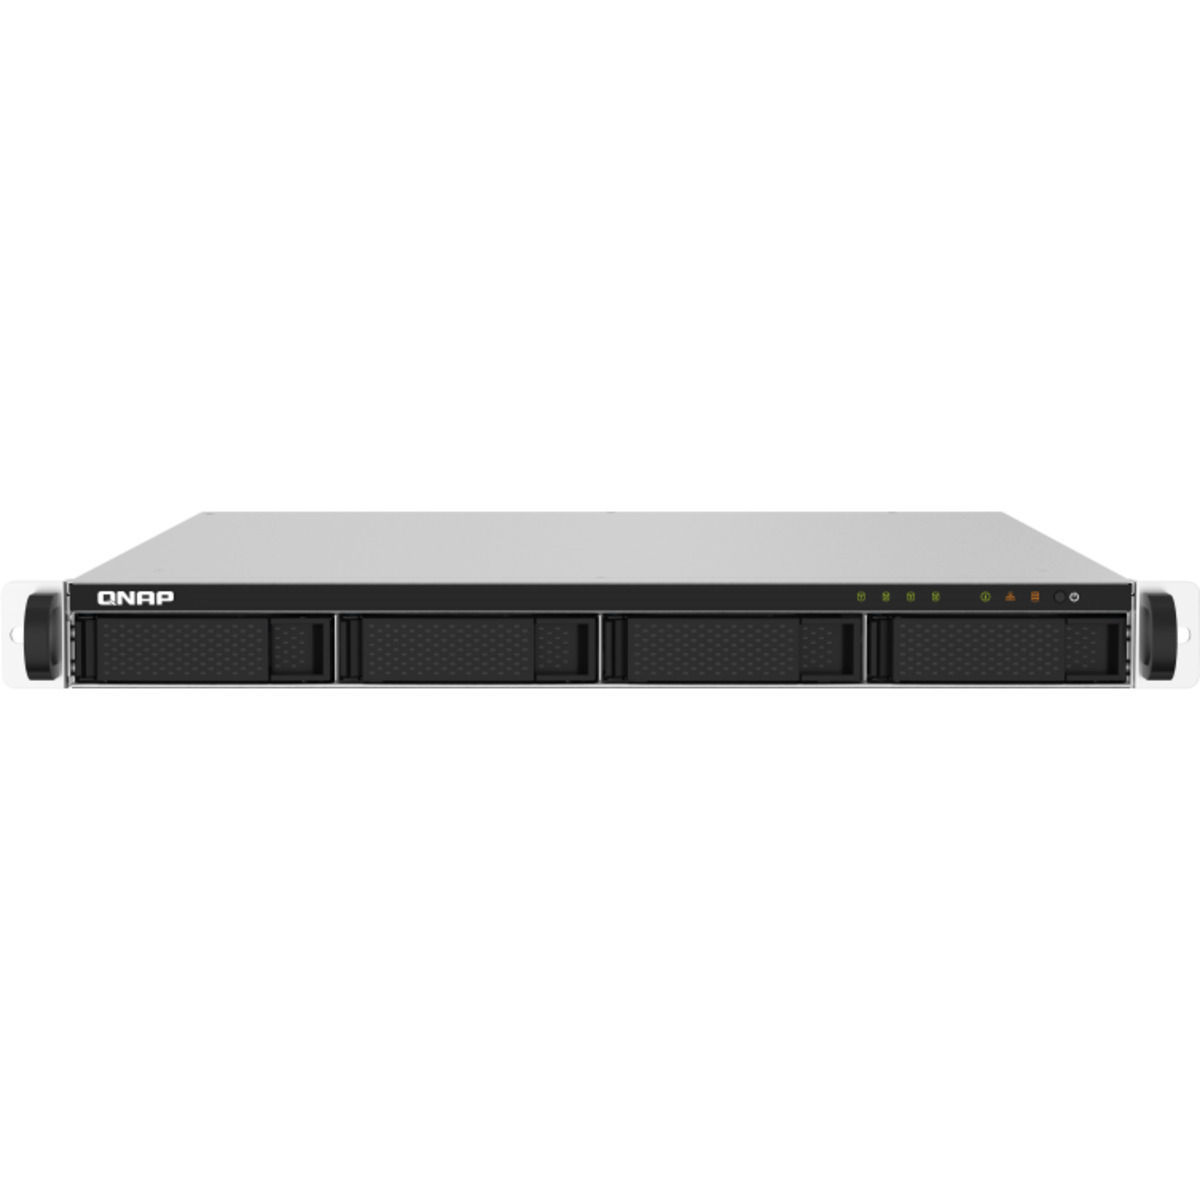 buy $2296 QNAP TS-432PXU-RP 48tb RackMount NAS - Network Attached Storage Device 4x12000gb Seagate IronWolf Pro ST12000NT001 3.5 7200rpm SATA 6Gb/s HDD NAS Class Drives Installed - Burn-In Tested - FREE RAM UPGRADE - nas headquarters buy network attached storage server device das new raid-5 free shipping simply usa TS-432PXU-RP